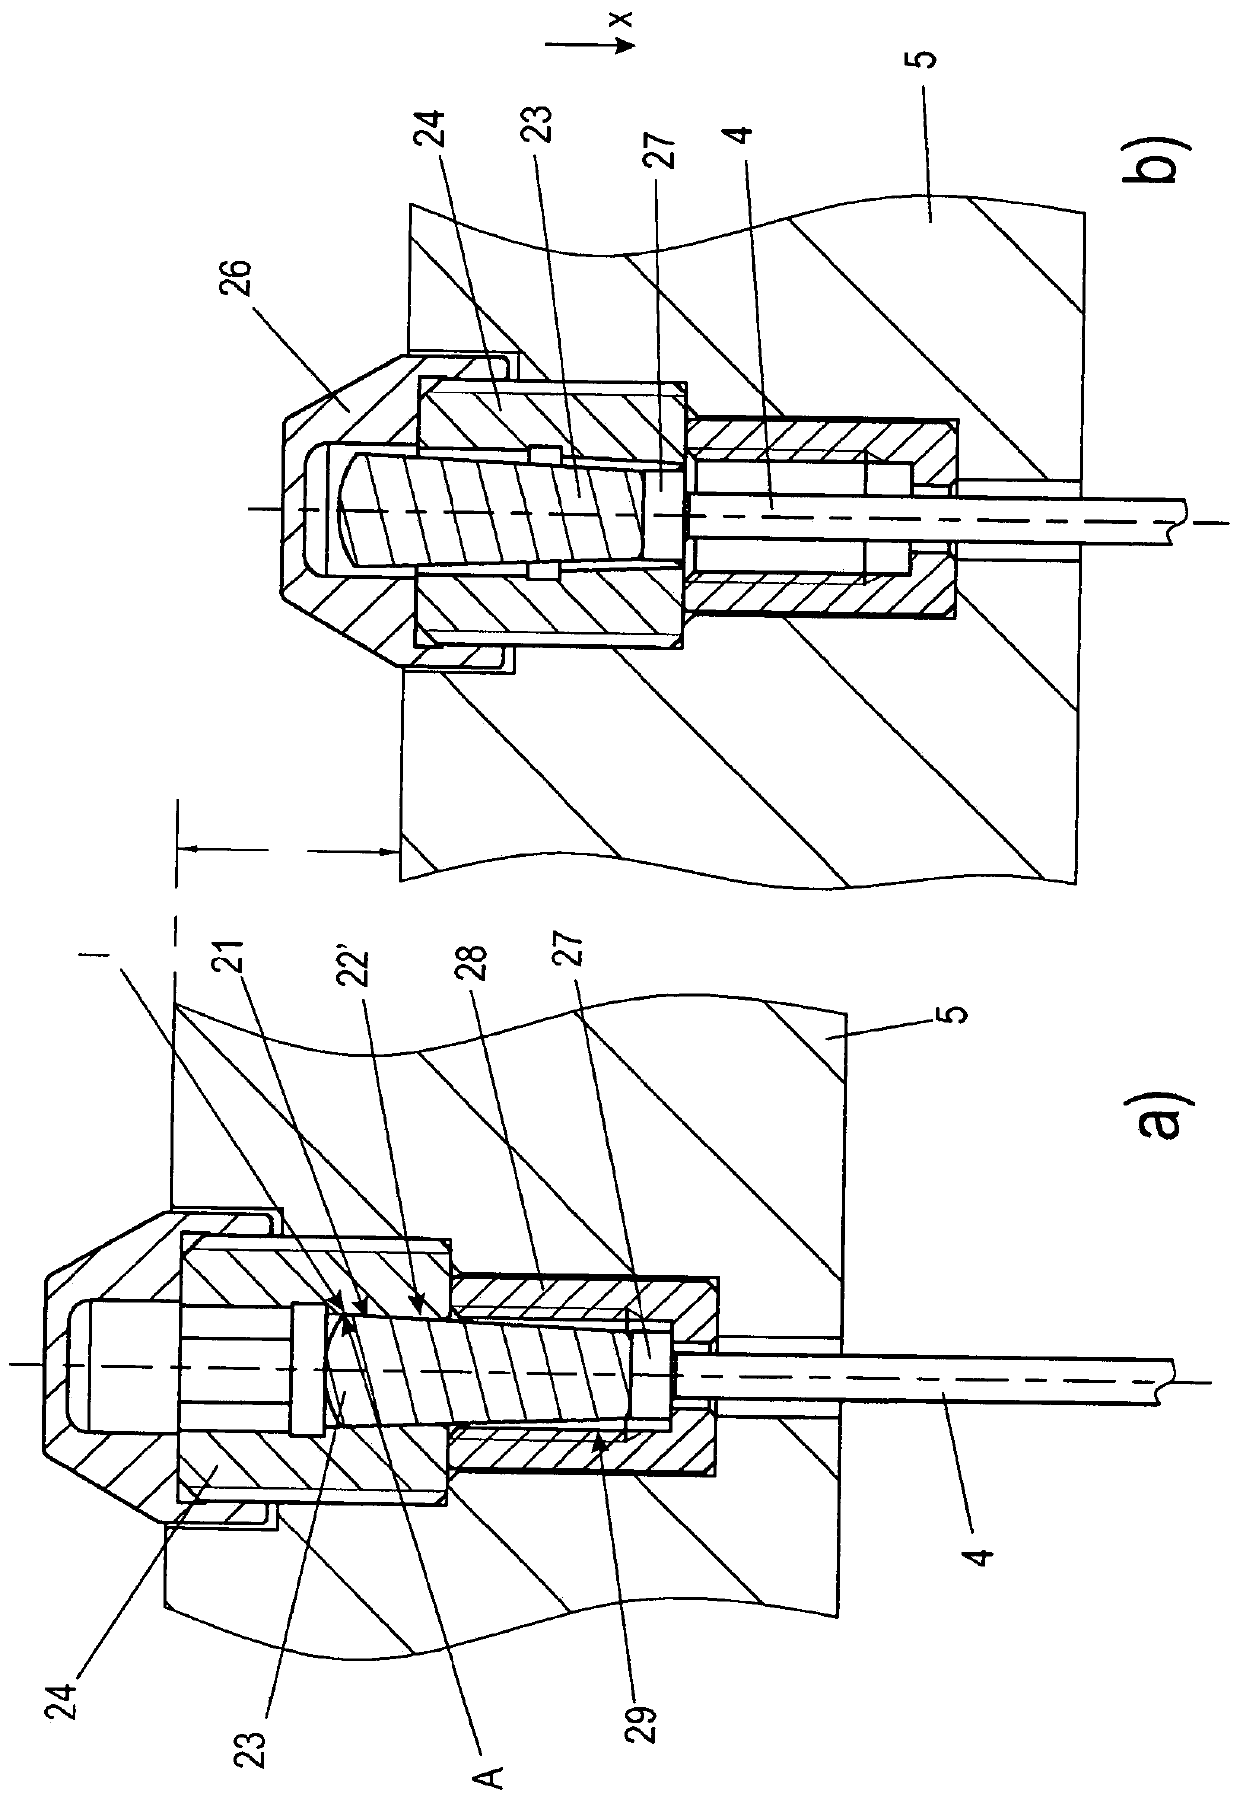 Hot runner device having an overload protection device